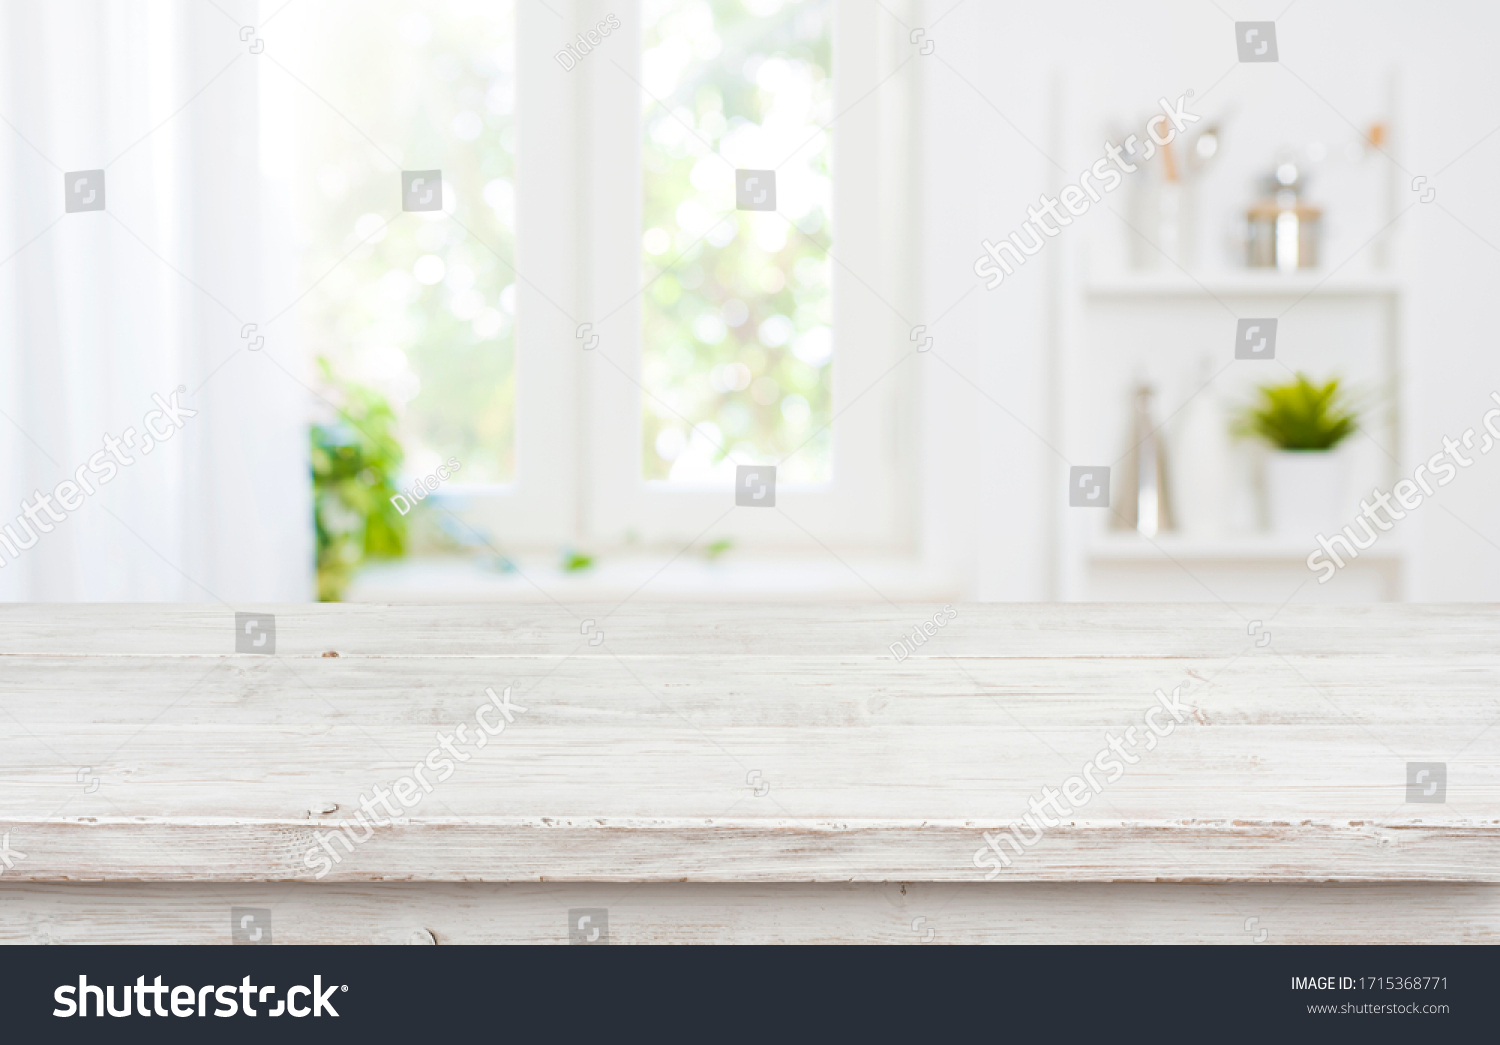 Free space table top background on blurred kitchen window interior #1715368771